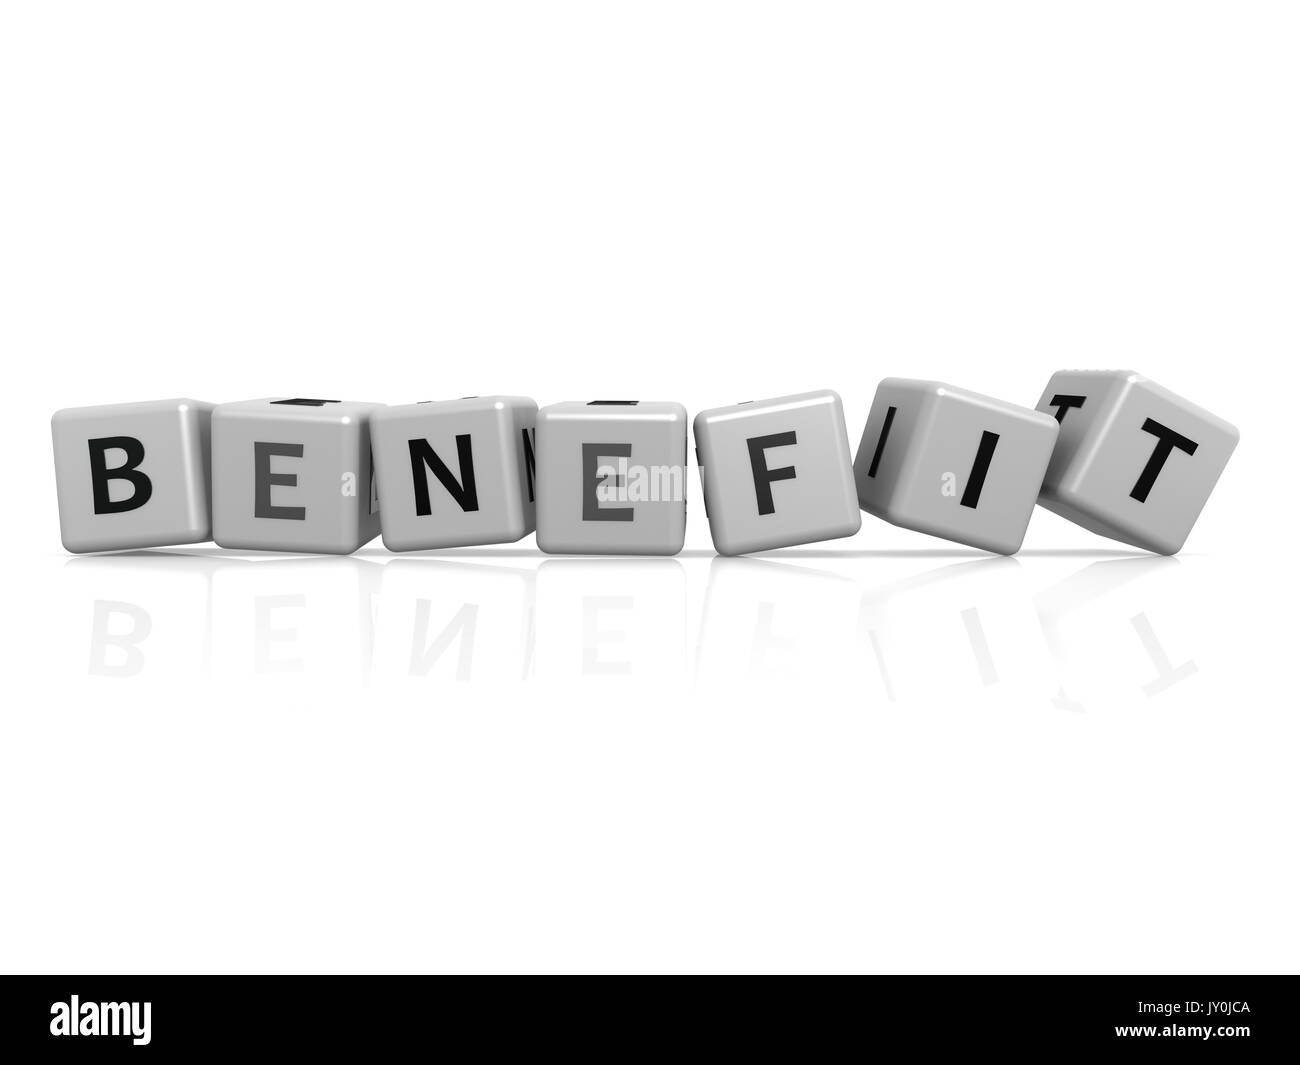 Benefit buzzword concept image with hi-res rendered artwork that could be used for any graphic design. Stock Photo